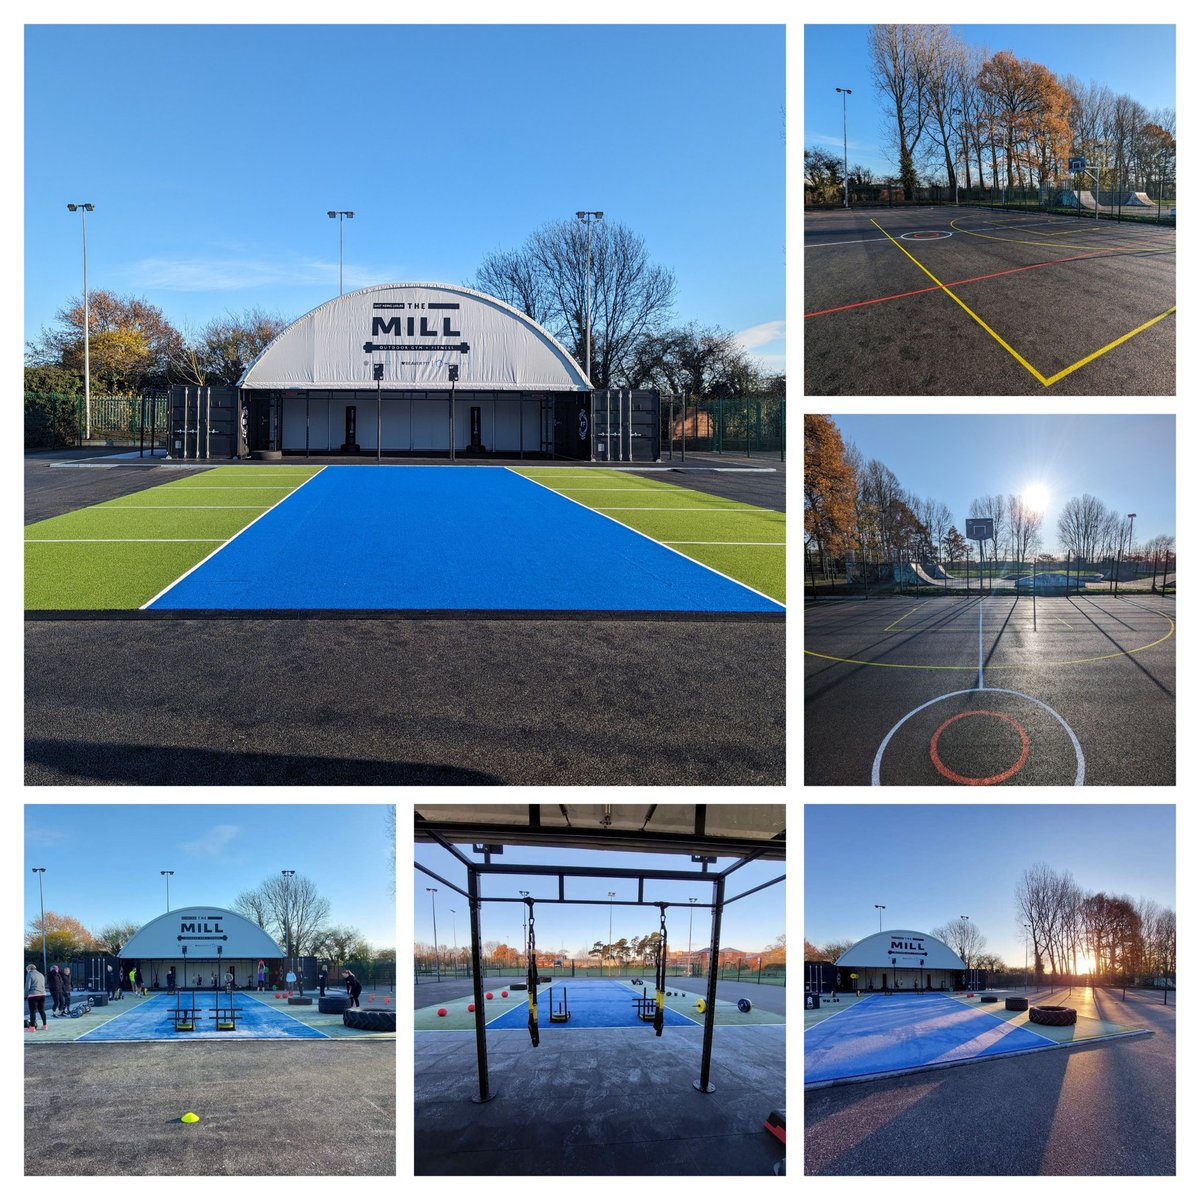 Enjoyed this one... Good to see it finally launched today! @Chris_Bev_SC nice working with ya! Great job @BeaverFitUK @Indigo_Fitness #TheMill #OutdoorGym #Muga  #Beverley #EastYorkshire